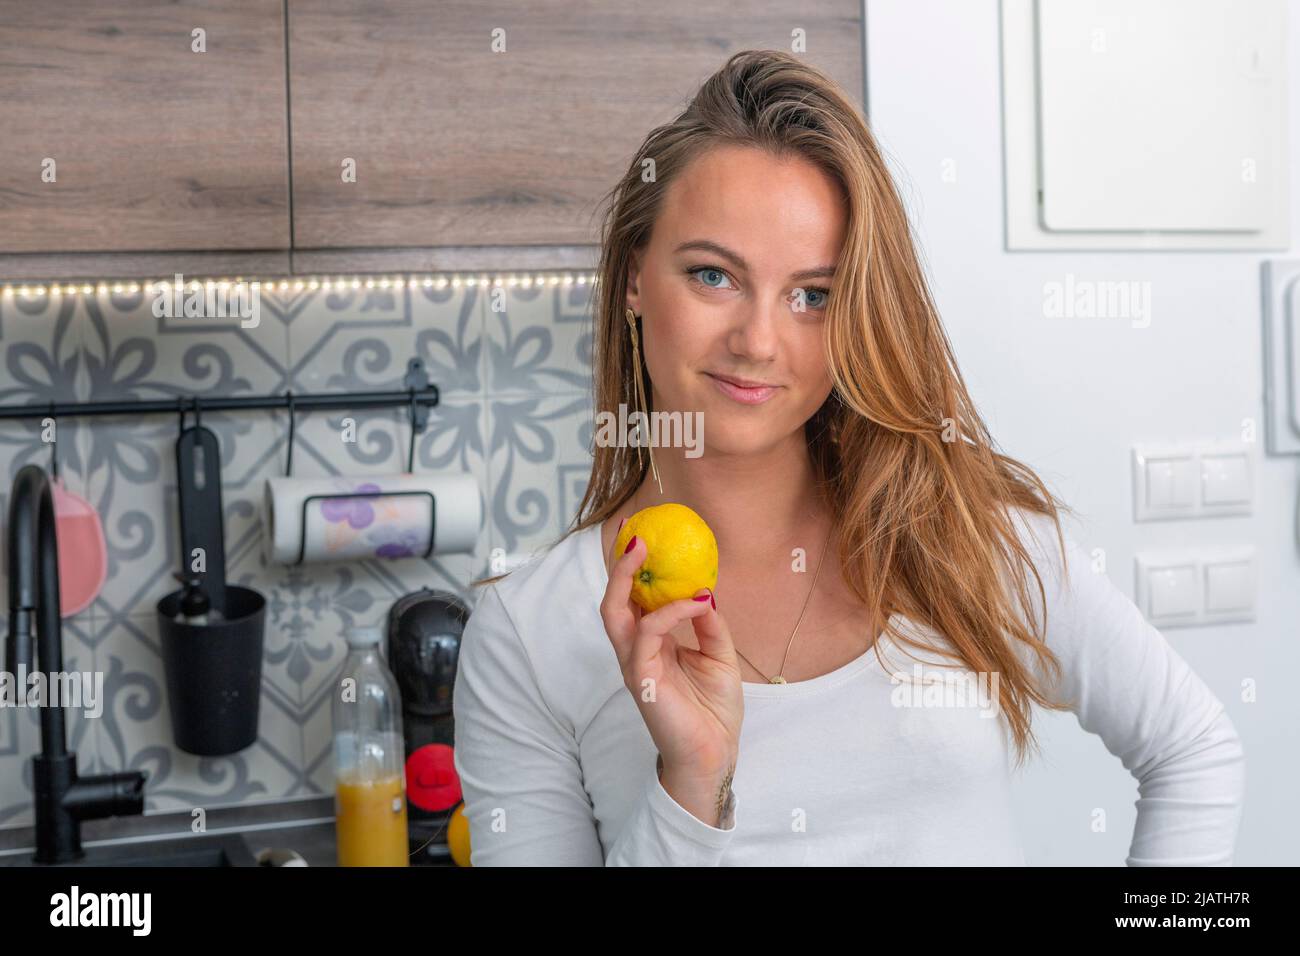 beautiful young blue-eyed blonde in the kitchen holding a lemon in her hand looking directly at the camera Stock Photo